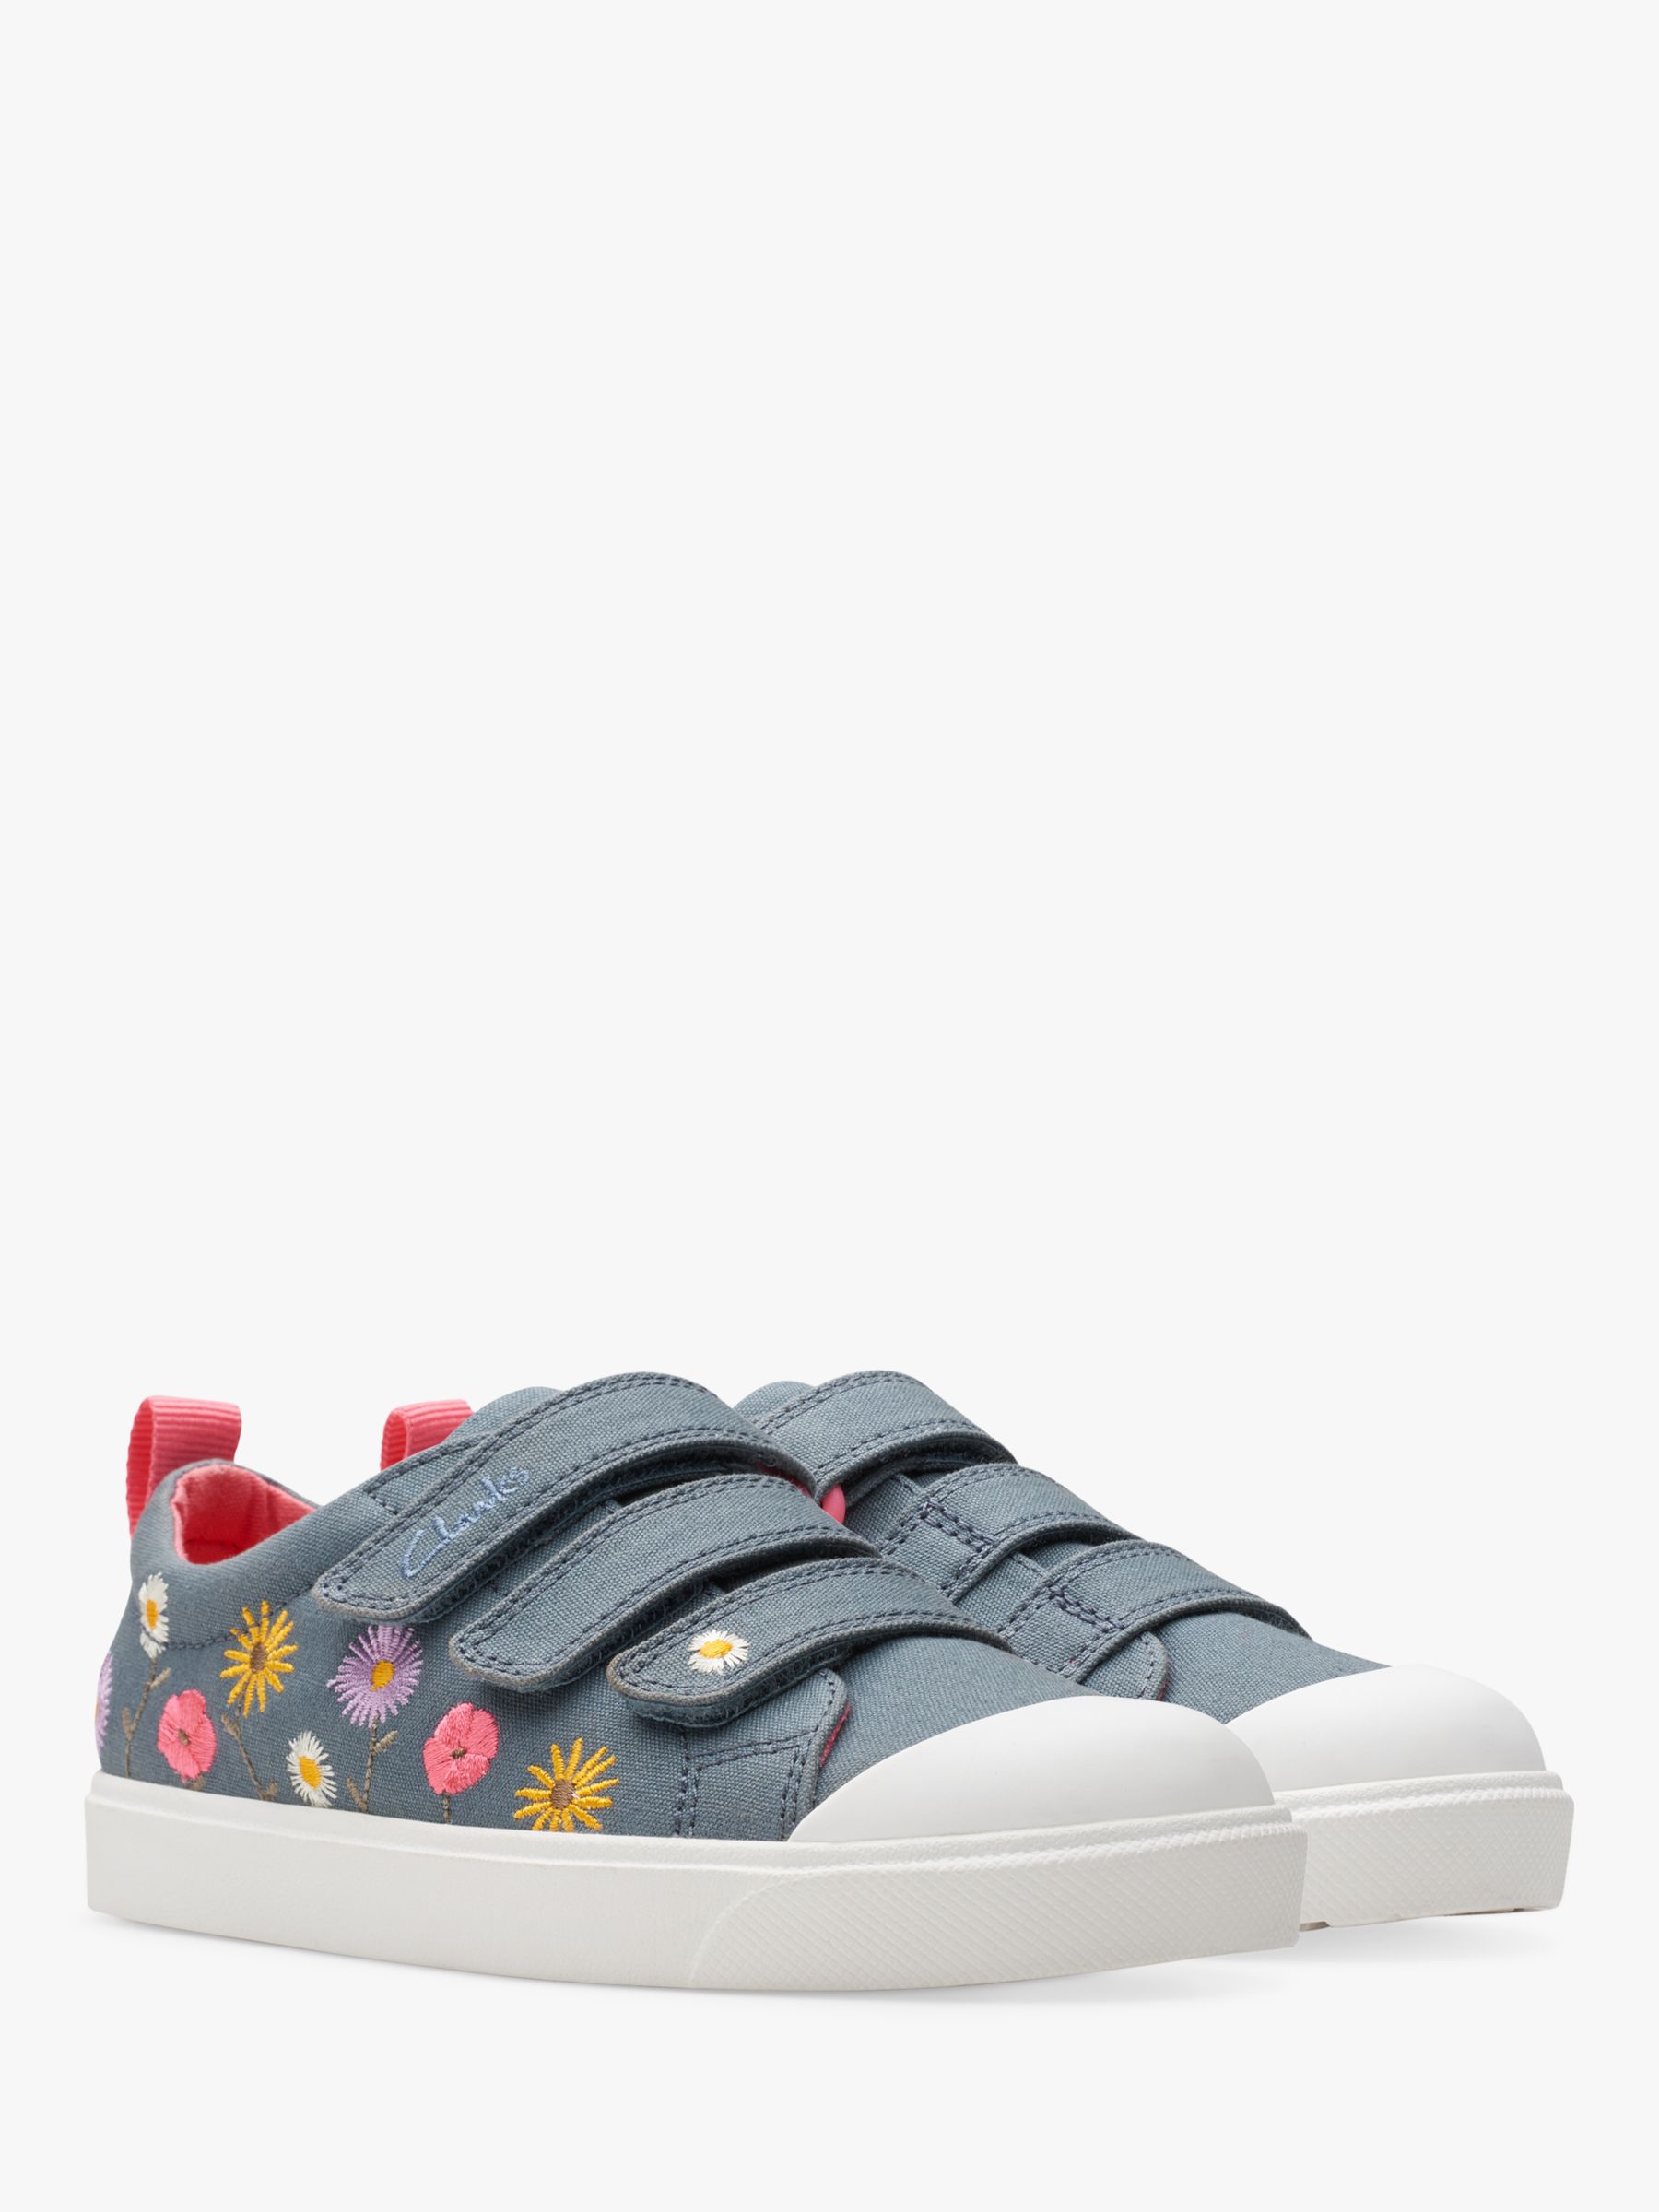 Clarks Kids' City Vibe K Canvas Floral Embroidered Trainers, Blue, 9.5G Jnr